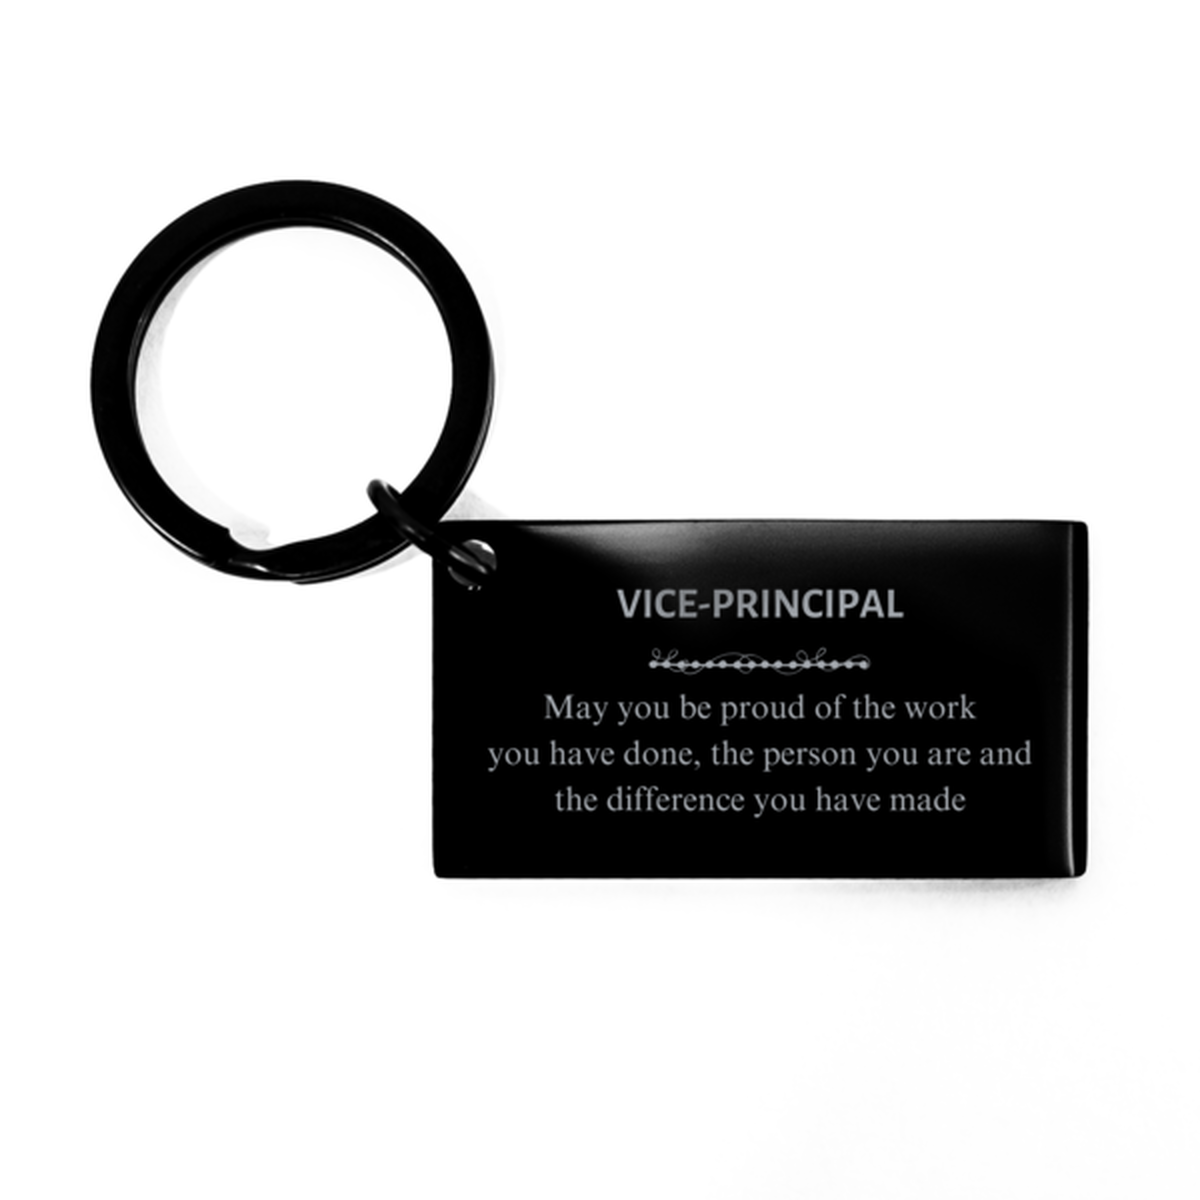 Analyst May you be proud of the work you have done, Retirement Vice-principal Keychain for Colleague Appreciation Gifts Amazing for Vice-principal